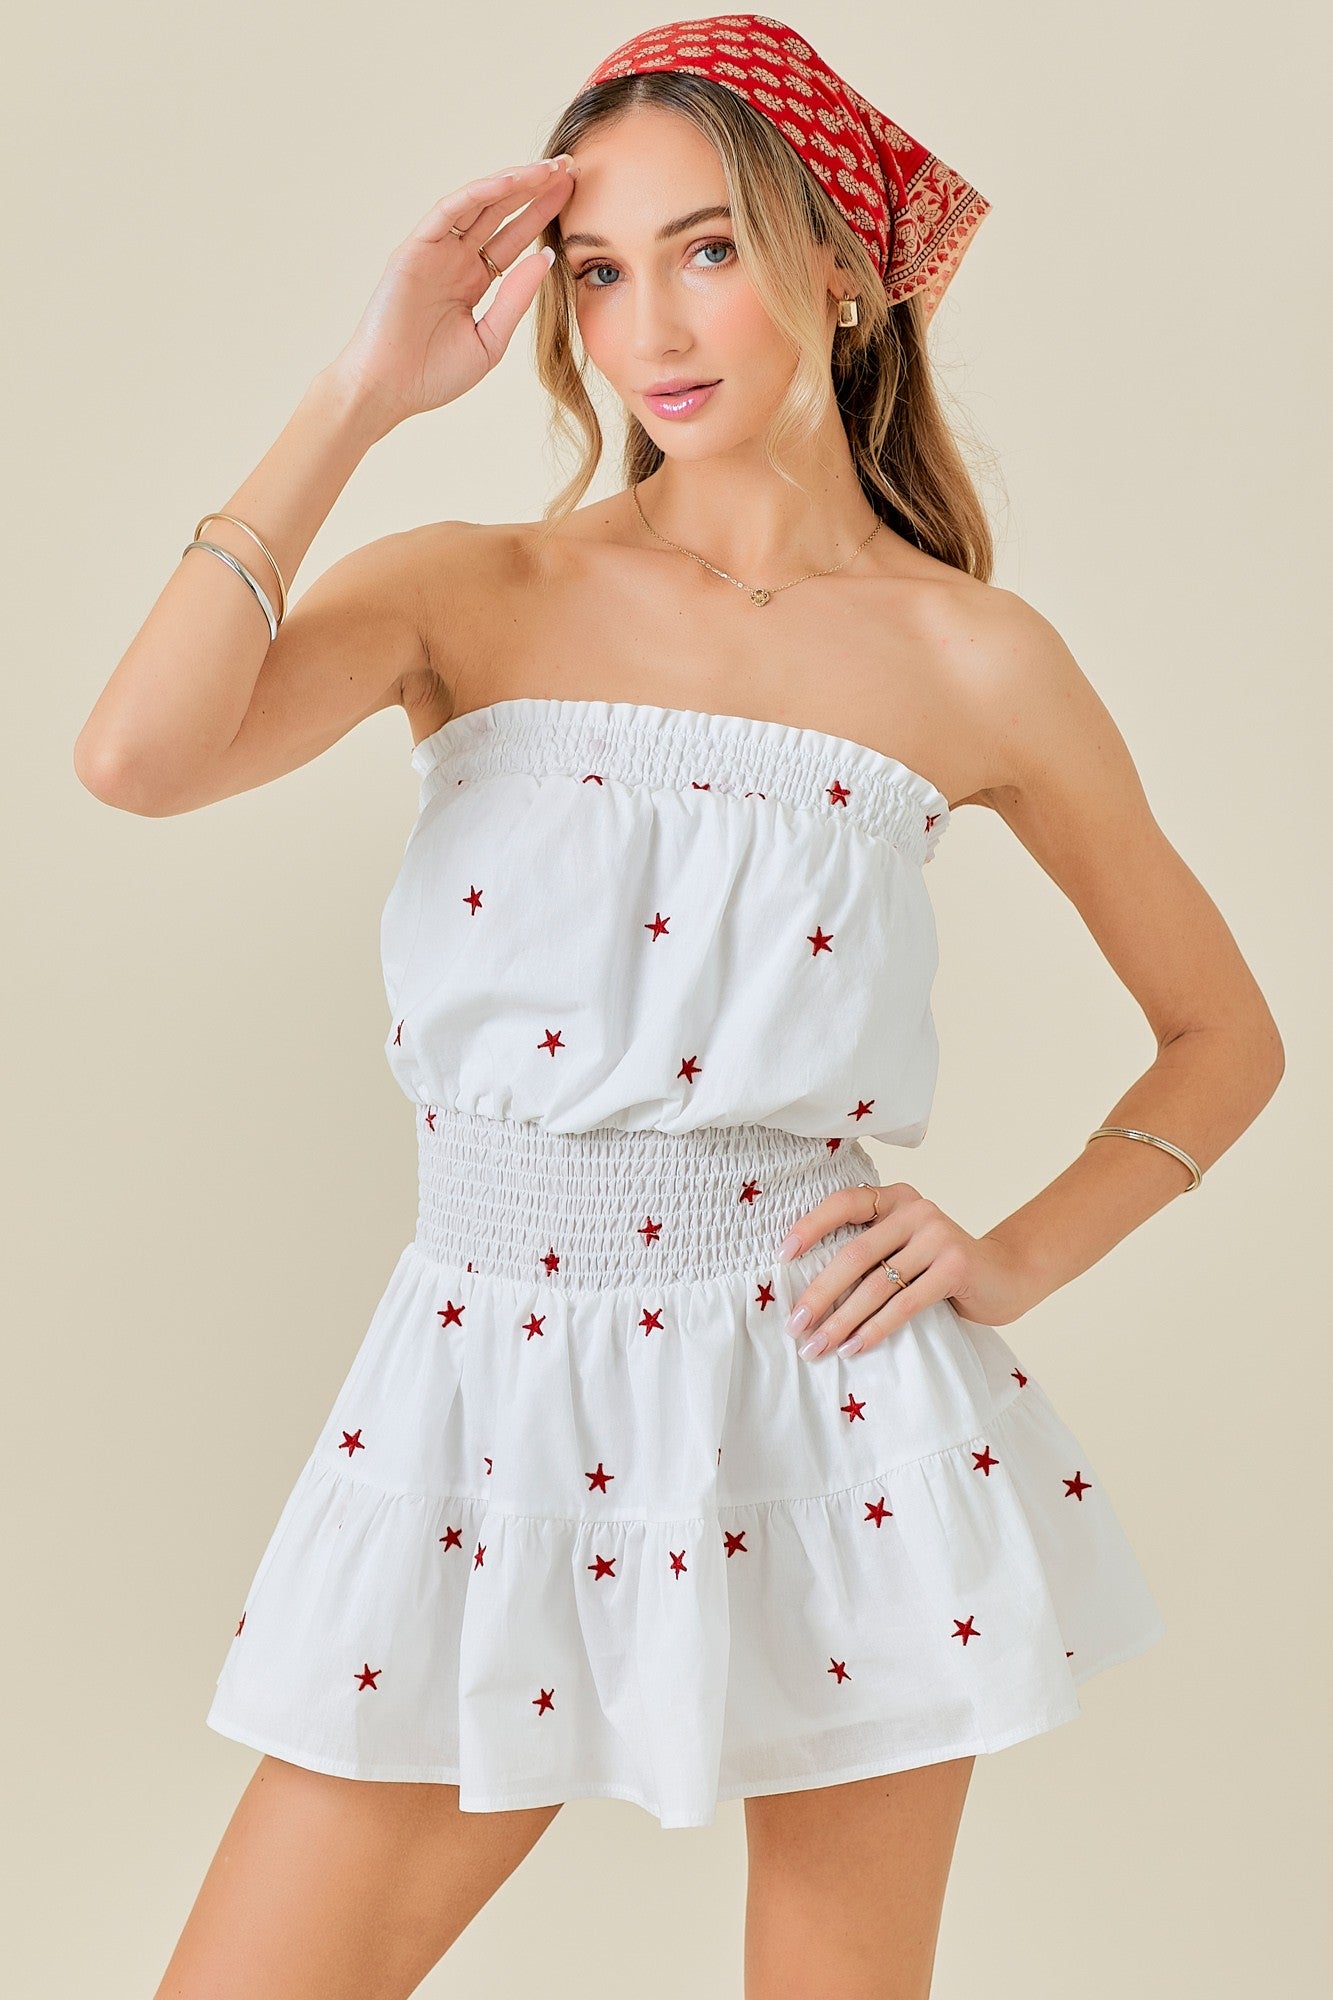 LETTIE STAR EMBROIDERED STRAPLESS ROMPER DRESS IN RED AND WHITE